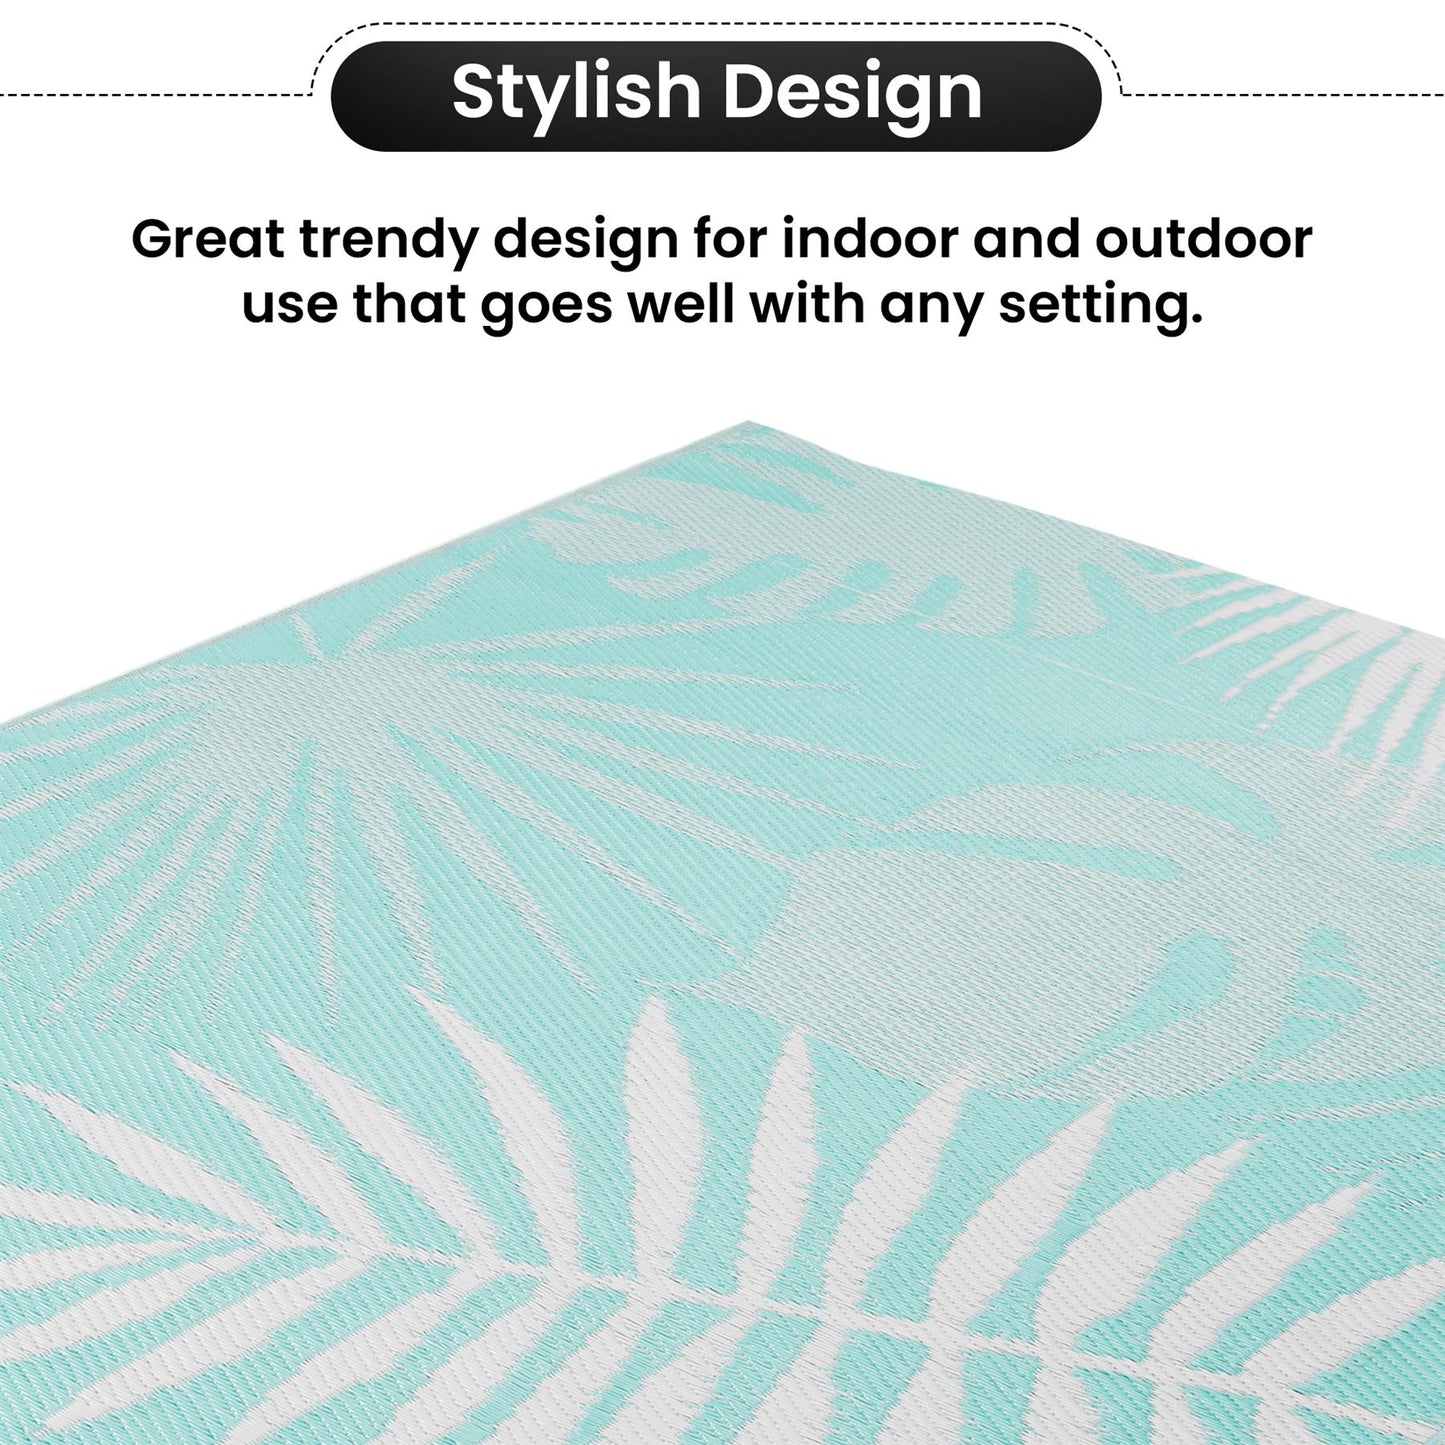 Step Outside in Style with an Outdoor Rug